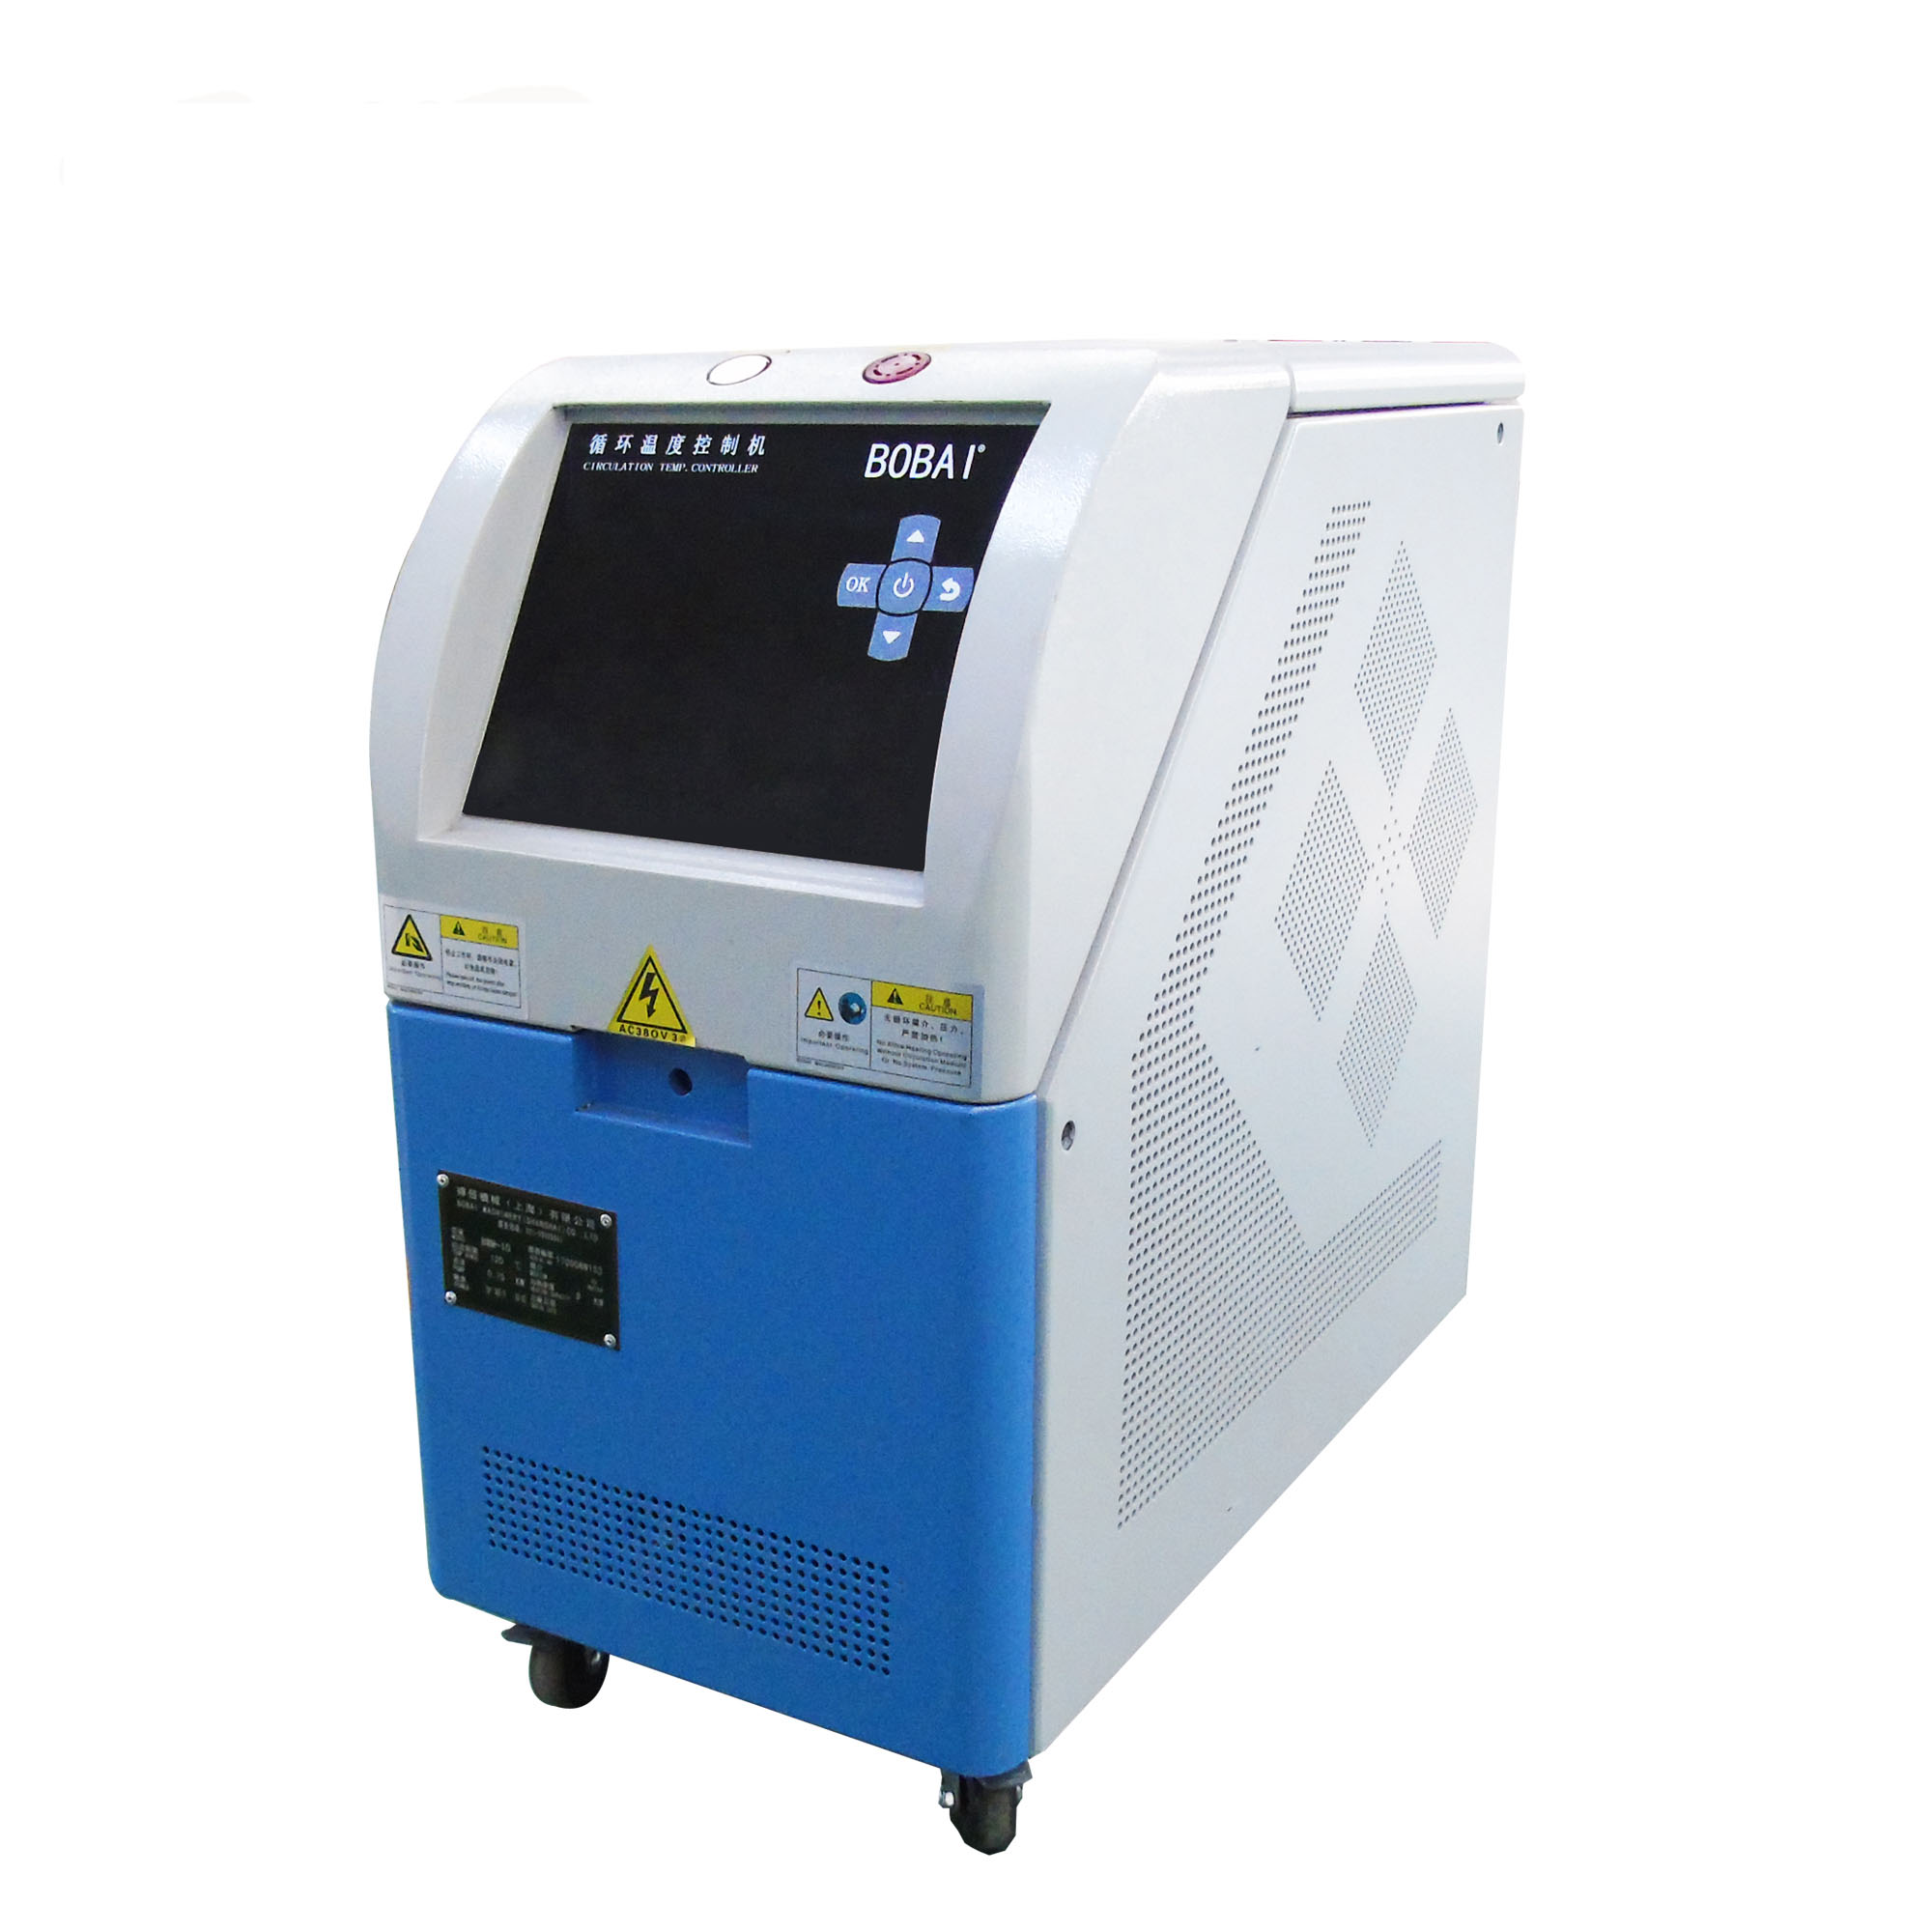 120 Degrees Water Mold Injection Temperature Controller